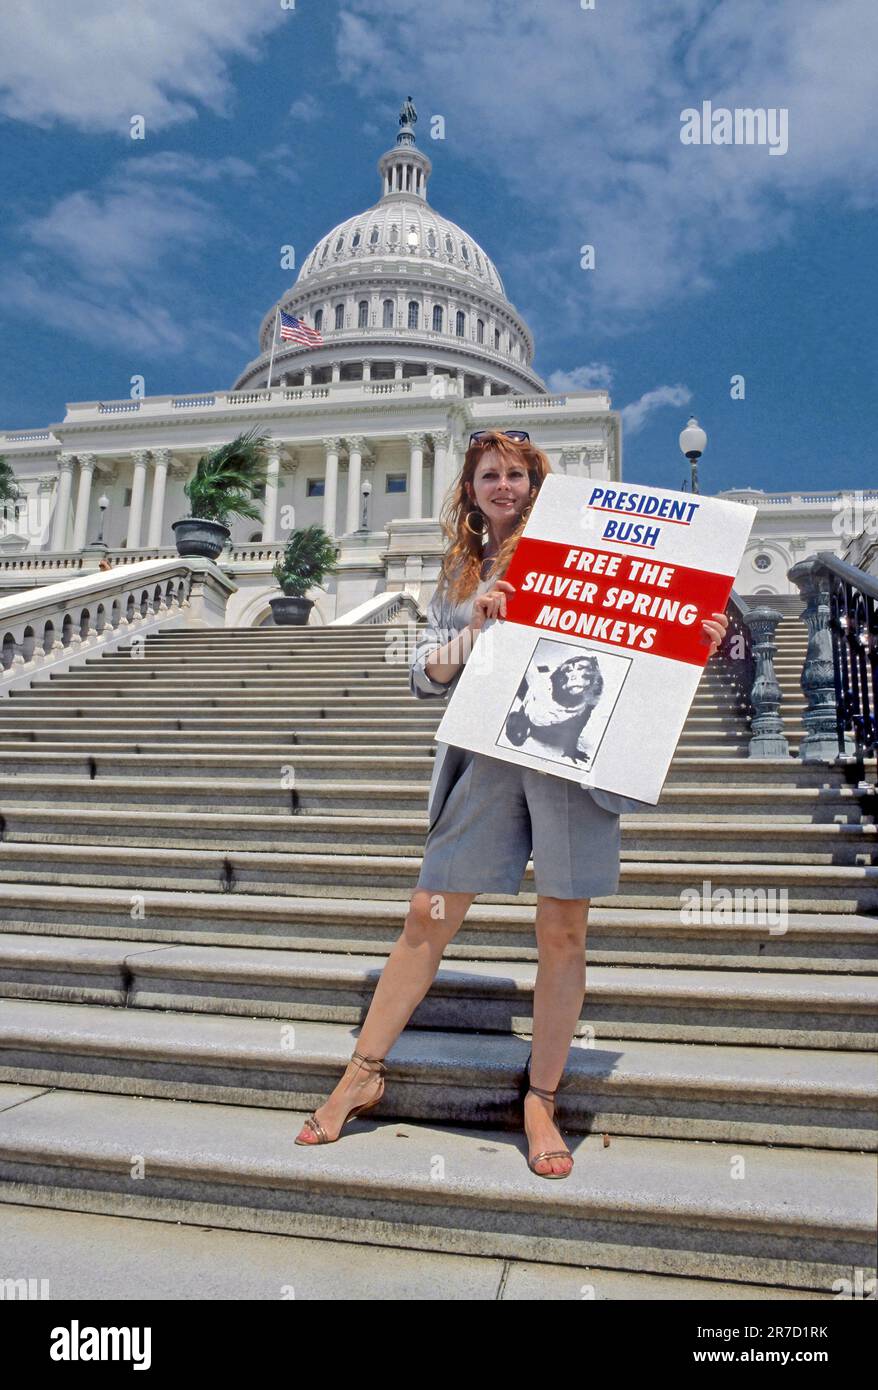 WASHINGTON DC - JUNE 10, 1990 Actress Cassandra Peterson (AKA Elvira, Mistress of the Dark) holds a protest sign depicting the Silver Spring Monkeys on the steps of the US Capitol during the animals rights protest march. Stock Photo